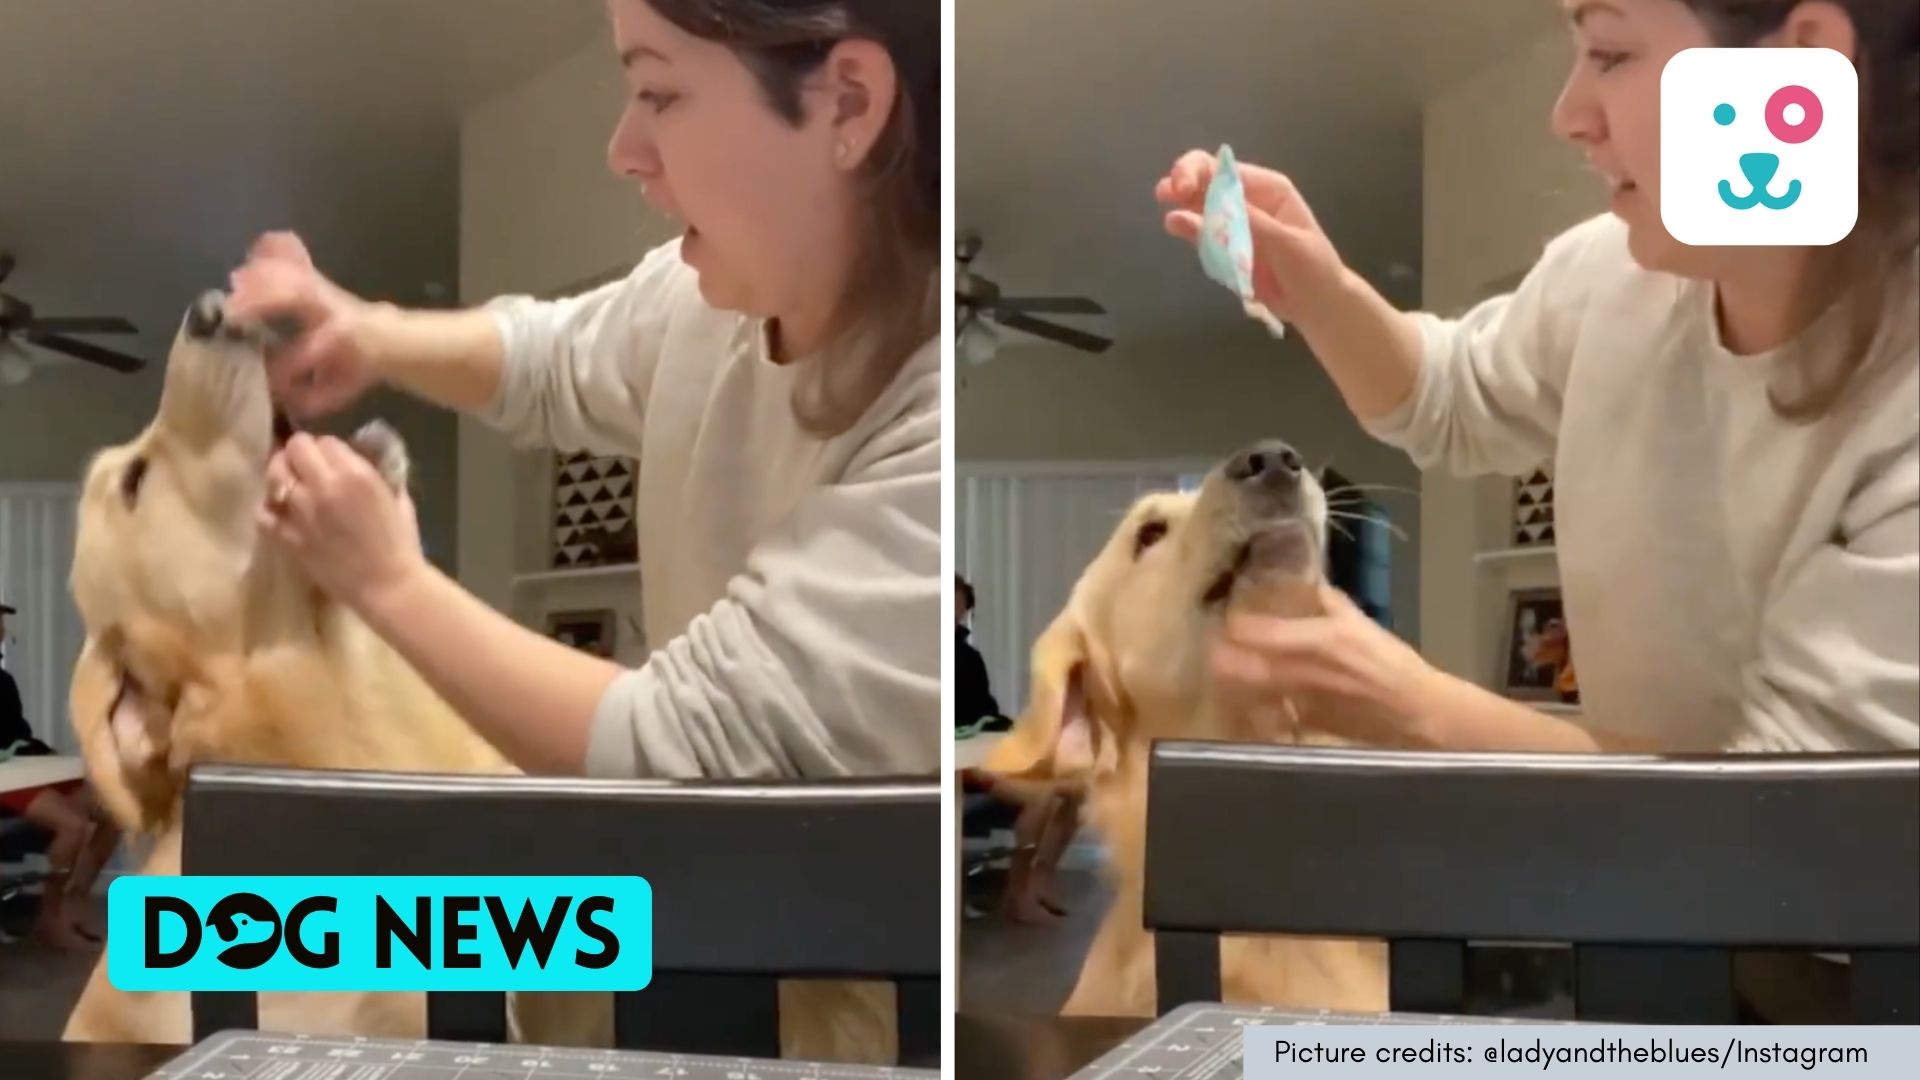 Dog puts something in mouth just to get human’s attention. Watch cute video